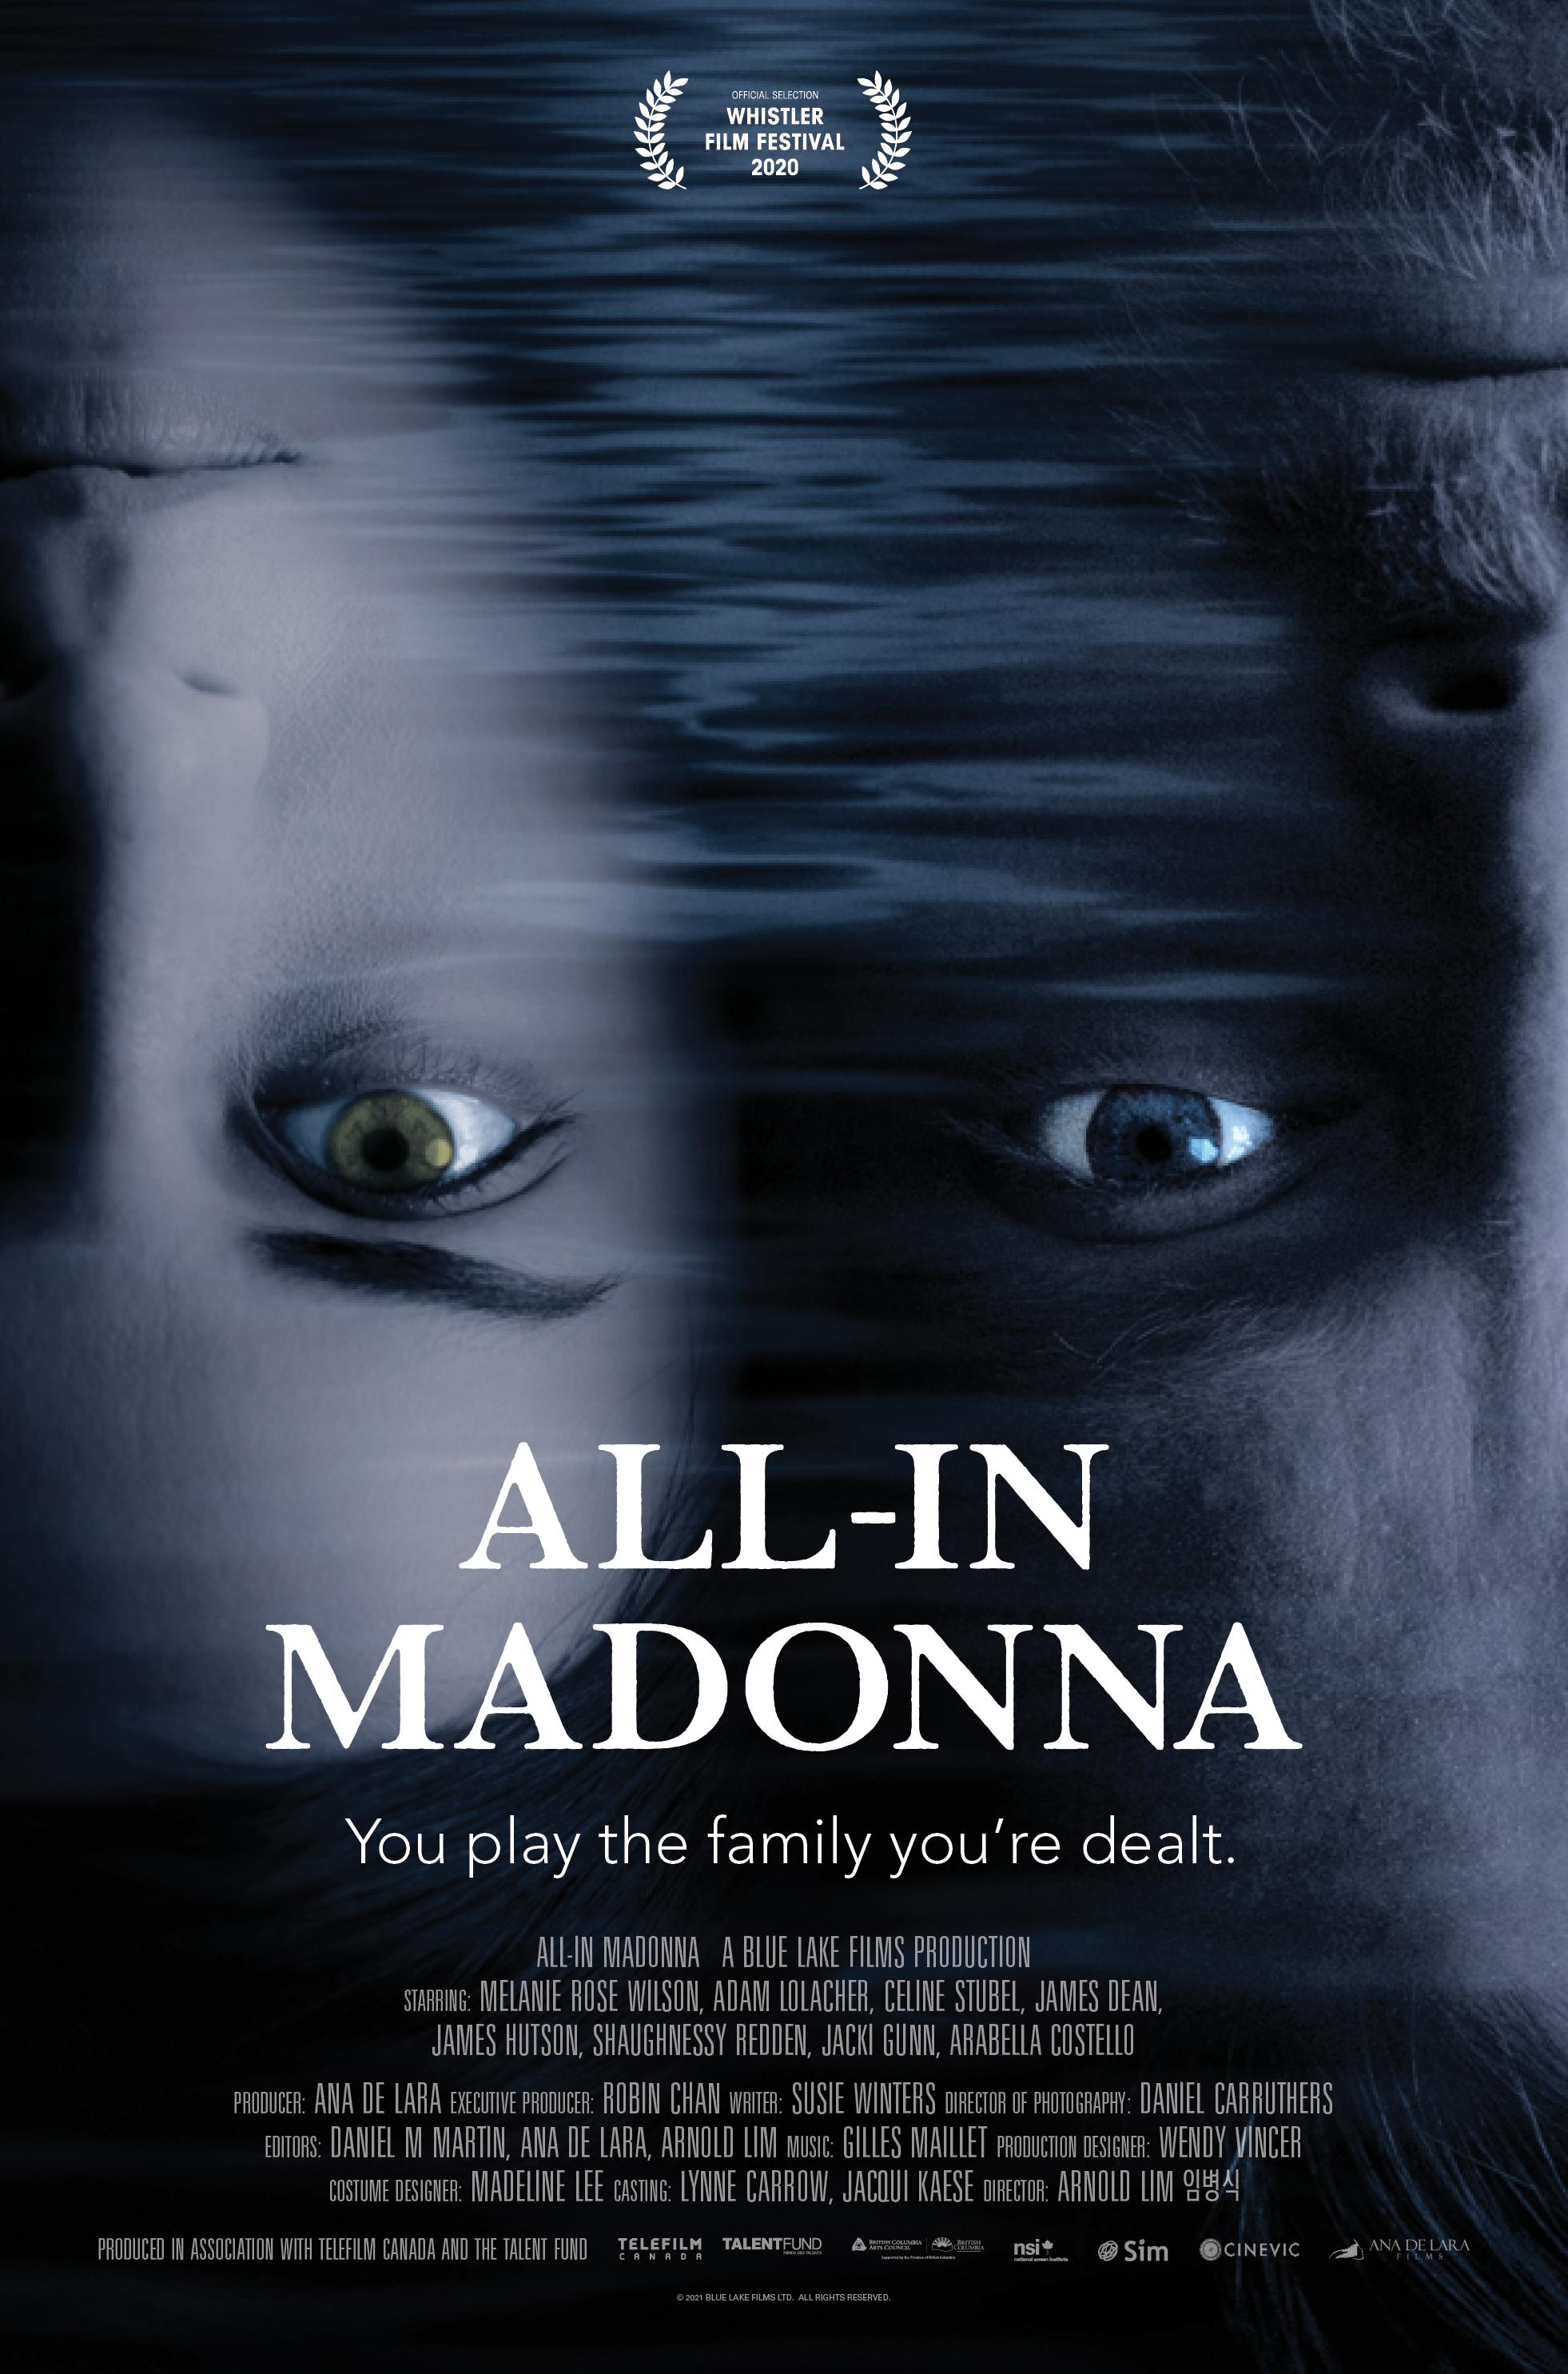 All-In Madonna (2020)